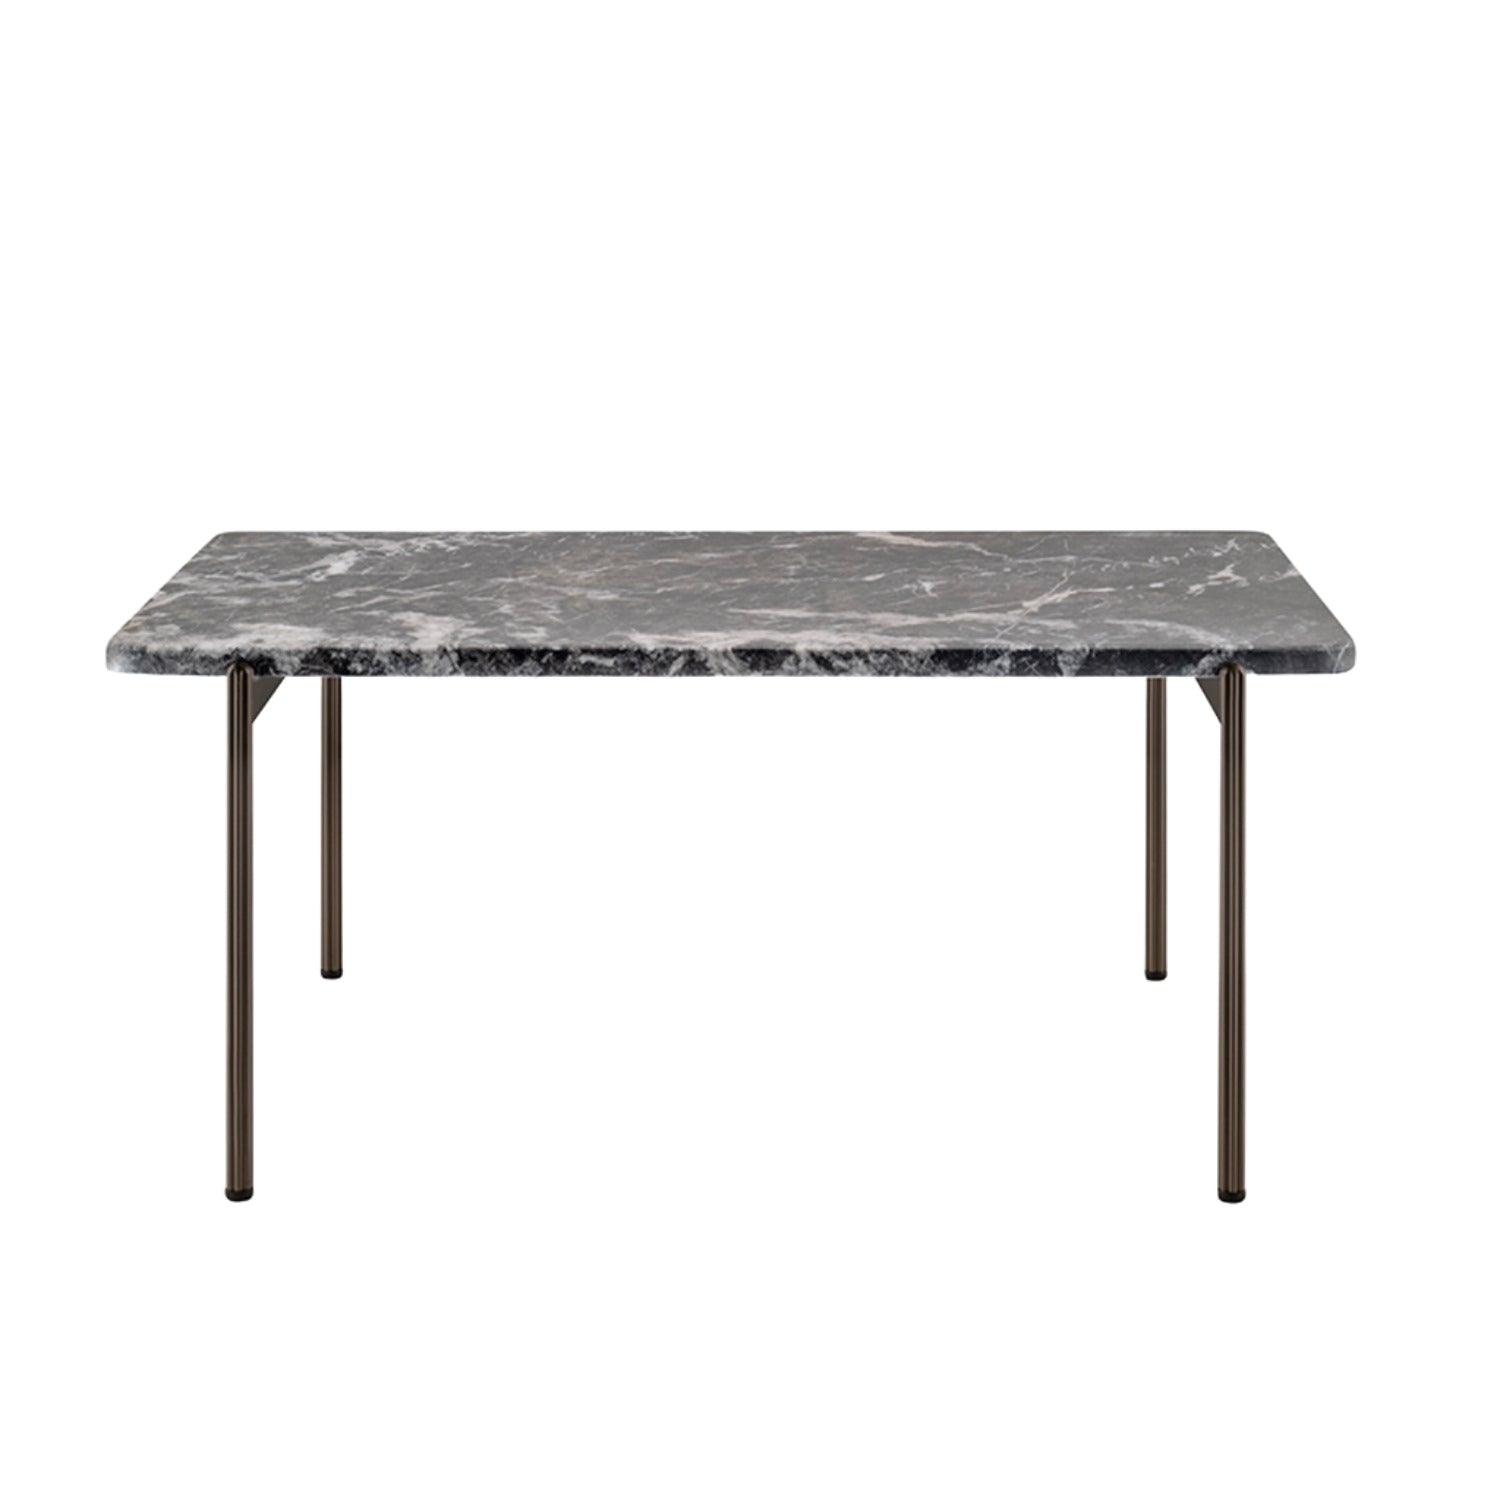 Pedrali Blume coffee side table in composite marble and black brass legs